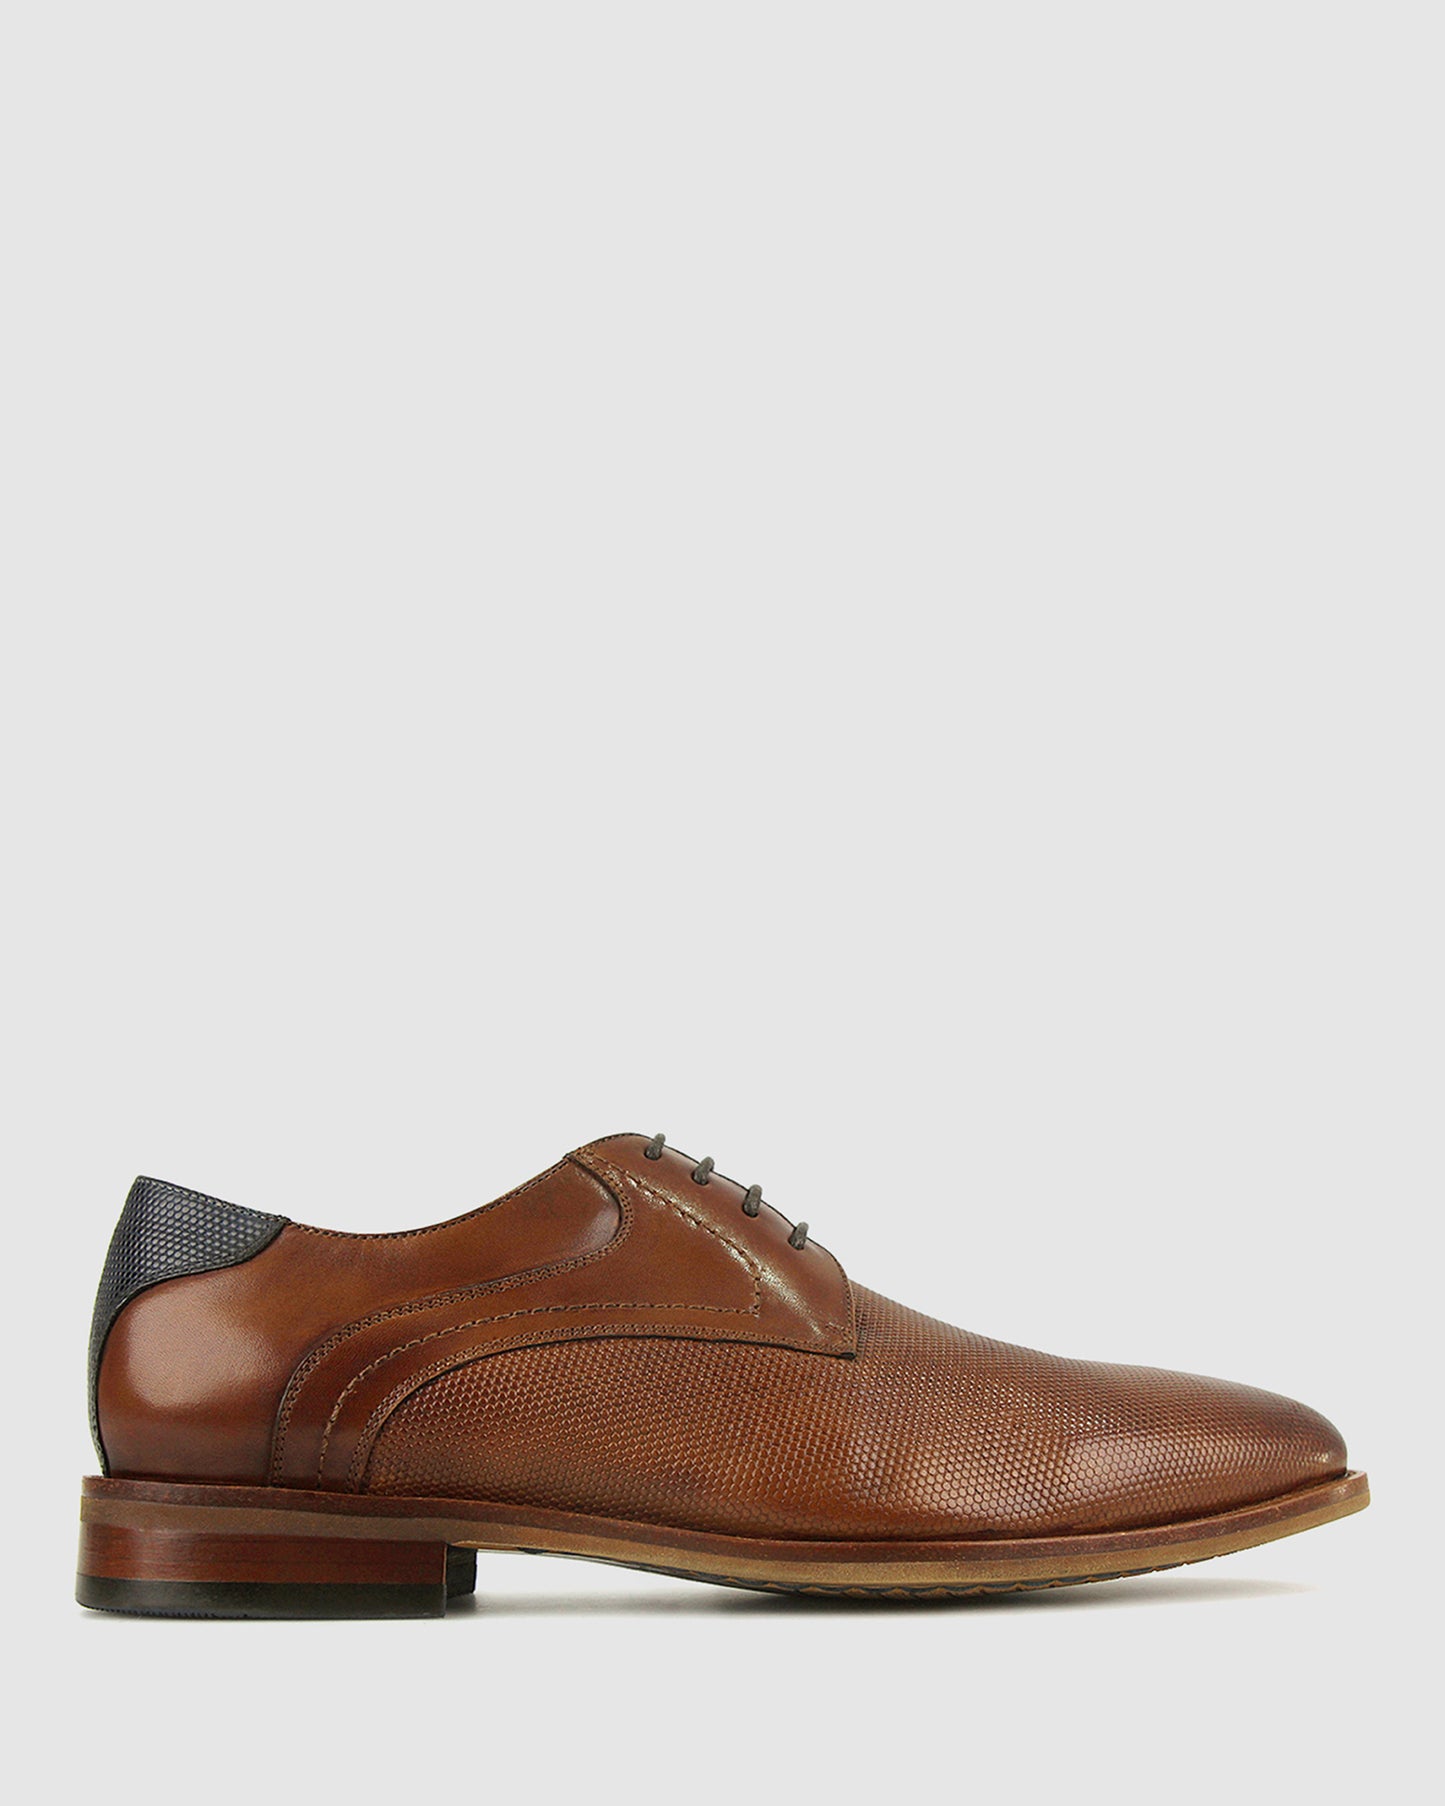 FURY Leather Dress Shoes